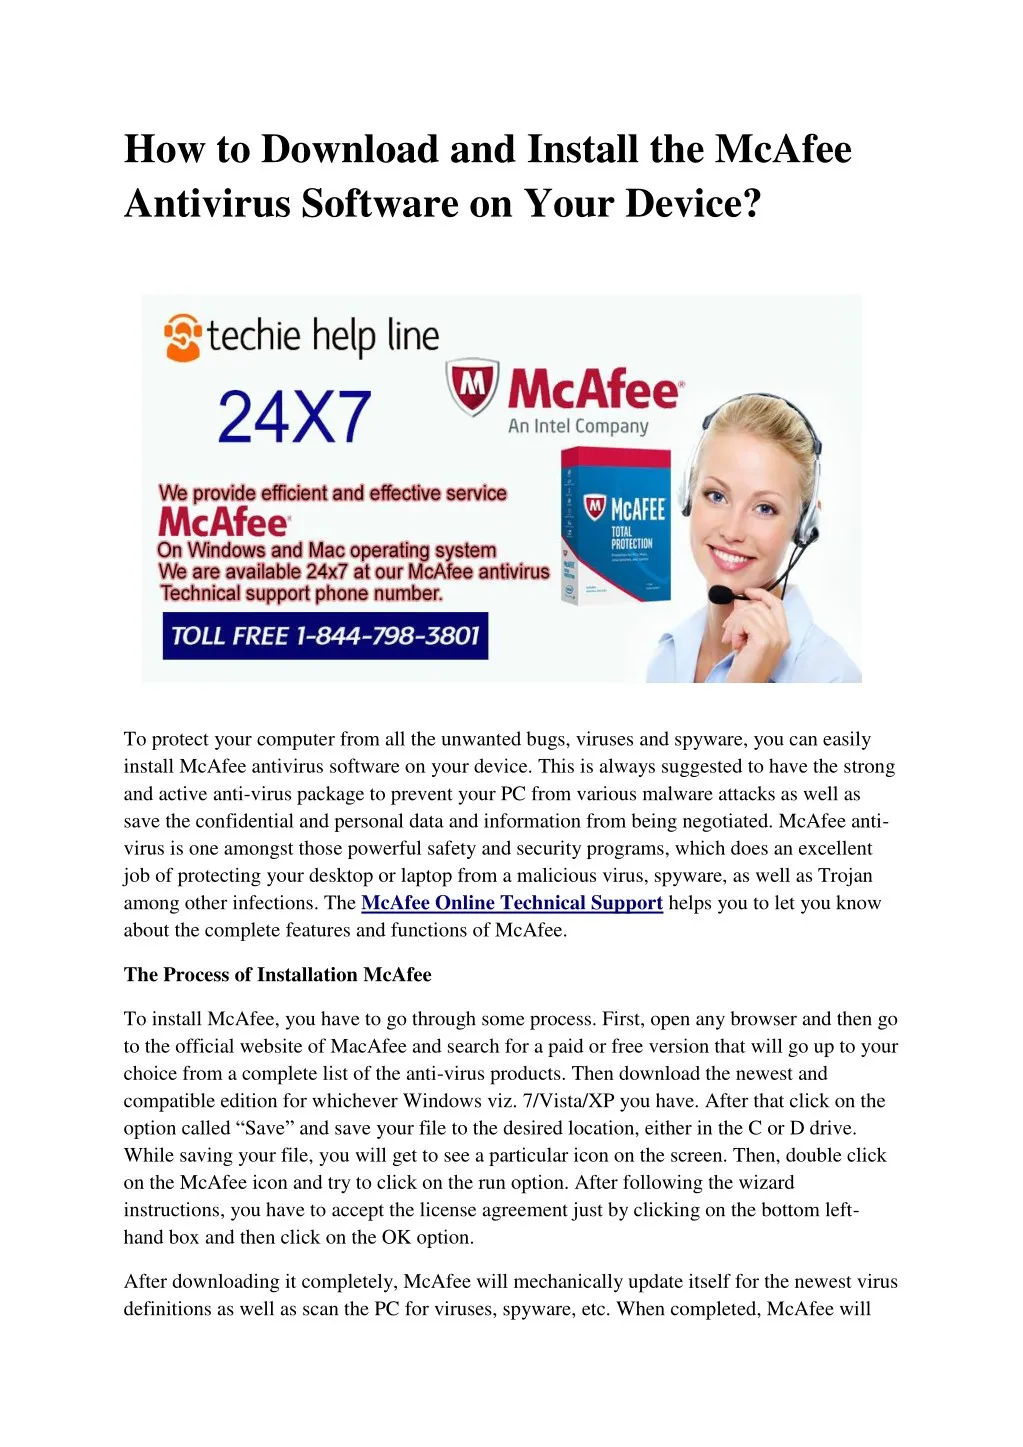 how to download and install the mcafee antivirus